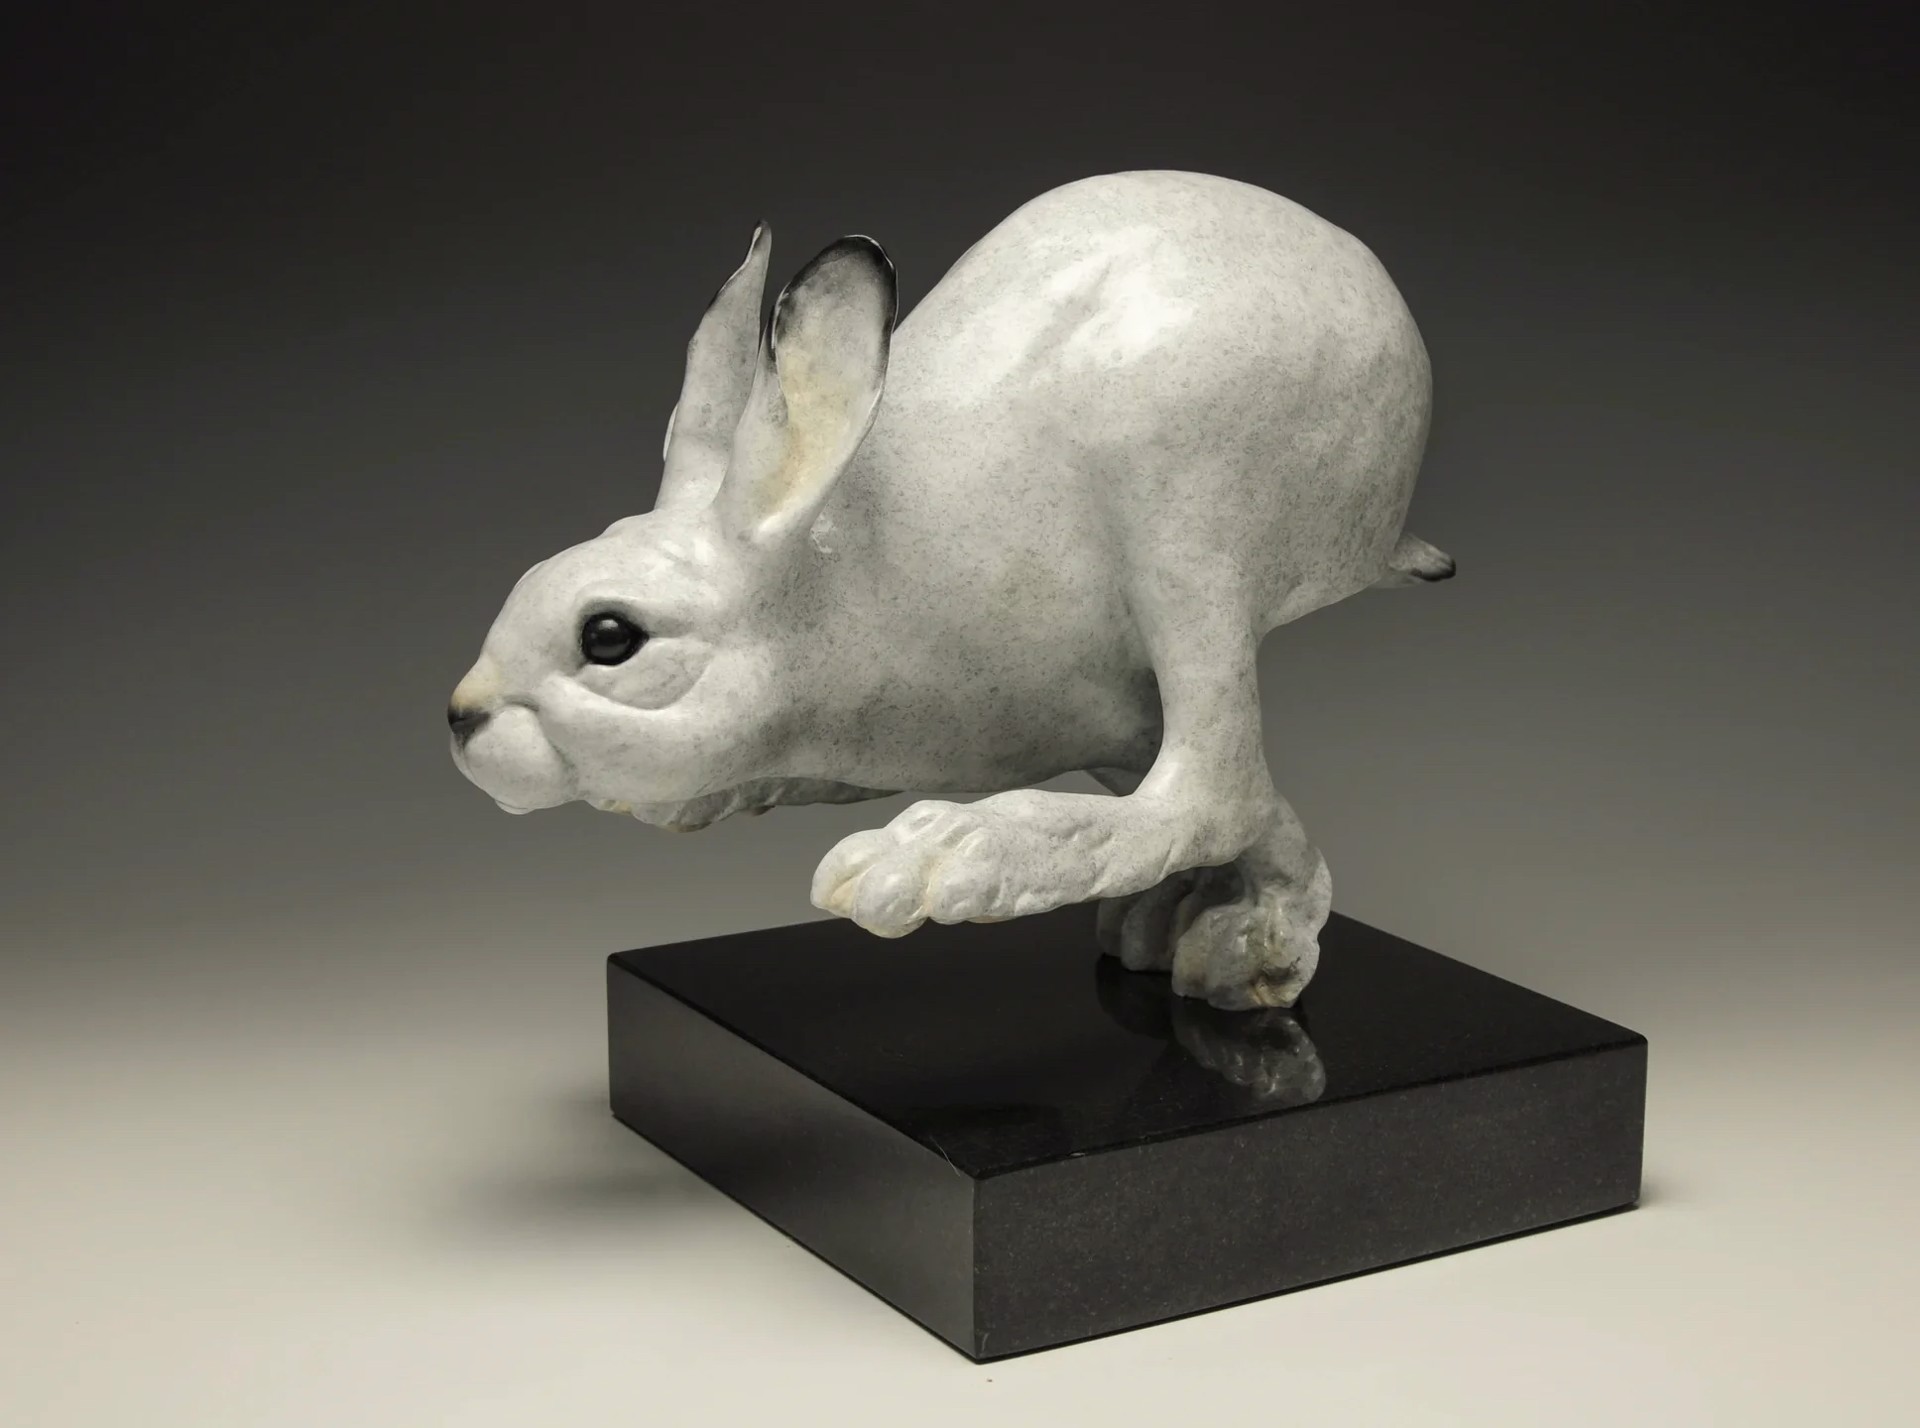 A Fine Art Sculpture In Bronze By Jeremy Bradshaw Featuring A Hare Running, Available At Gallery Wild